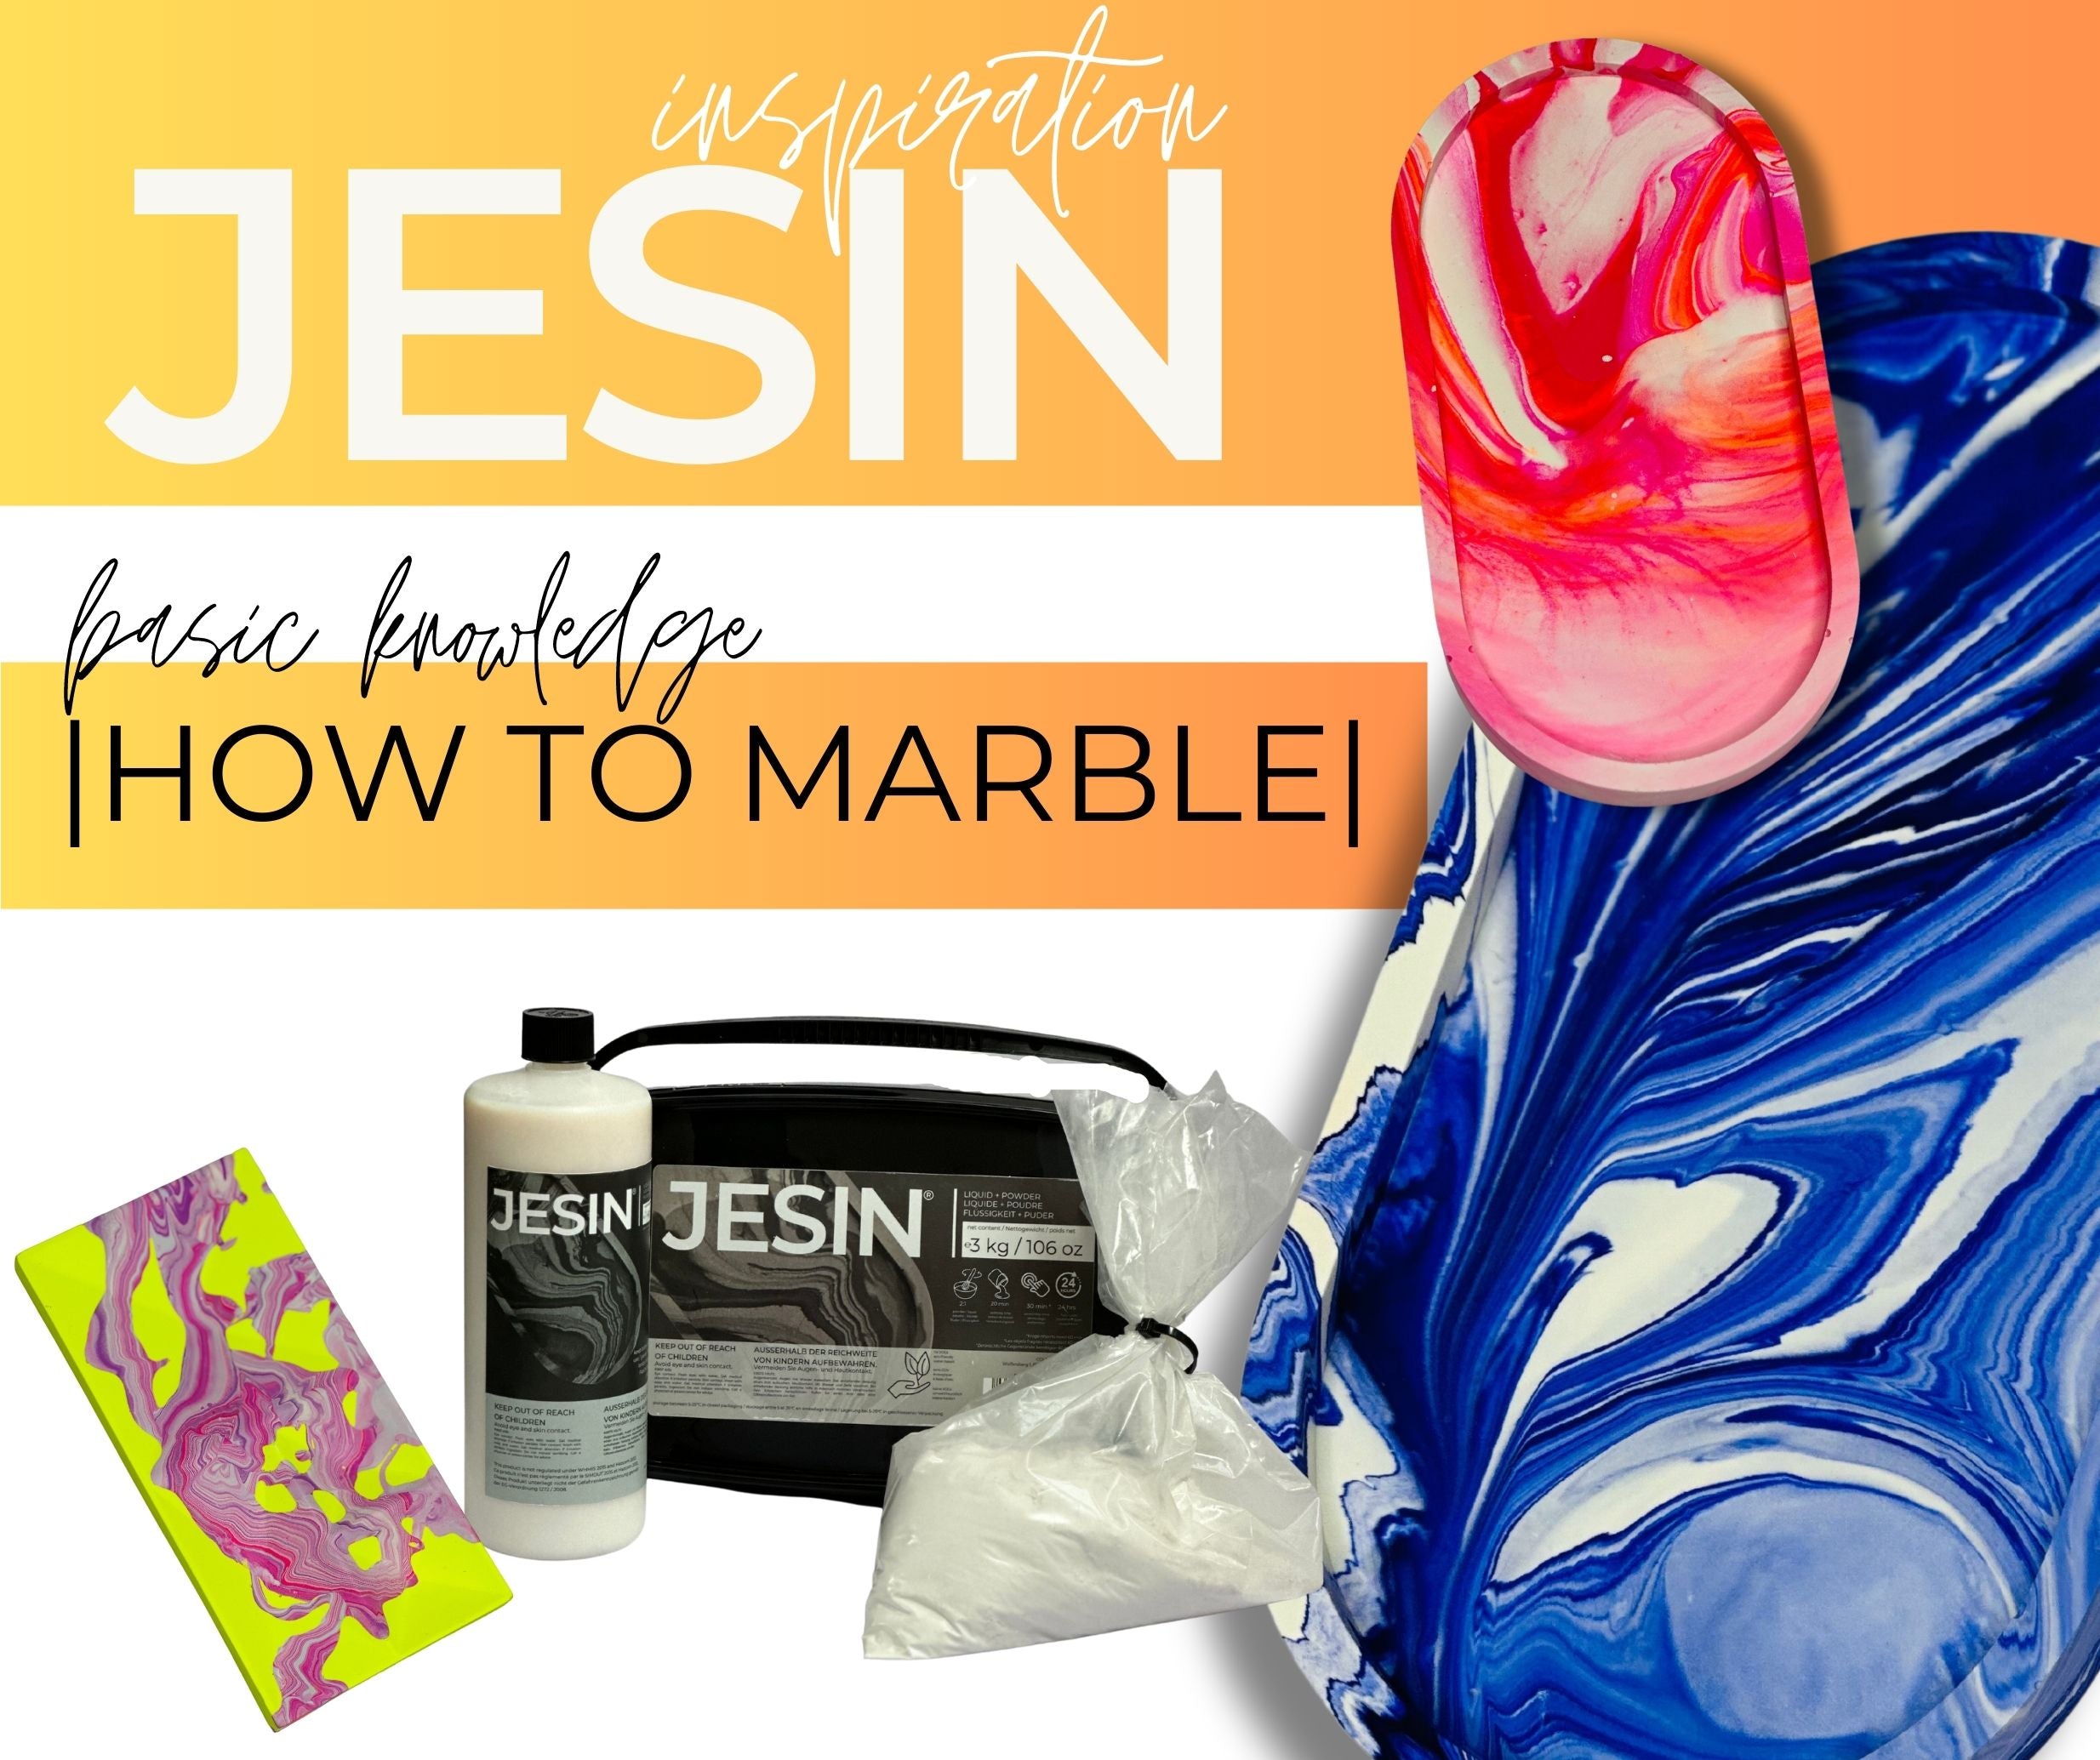 HOW TO MARBLE JESIN?